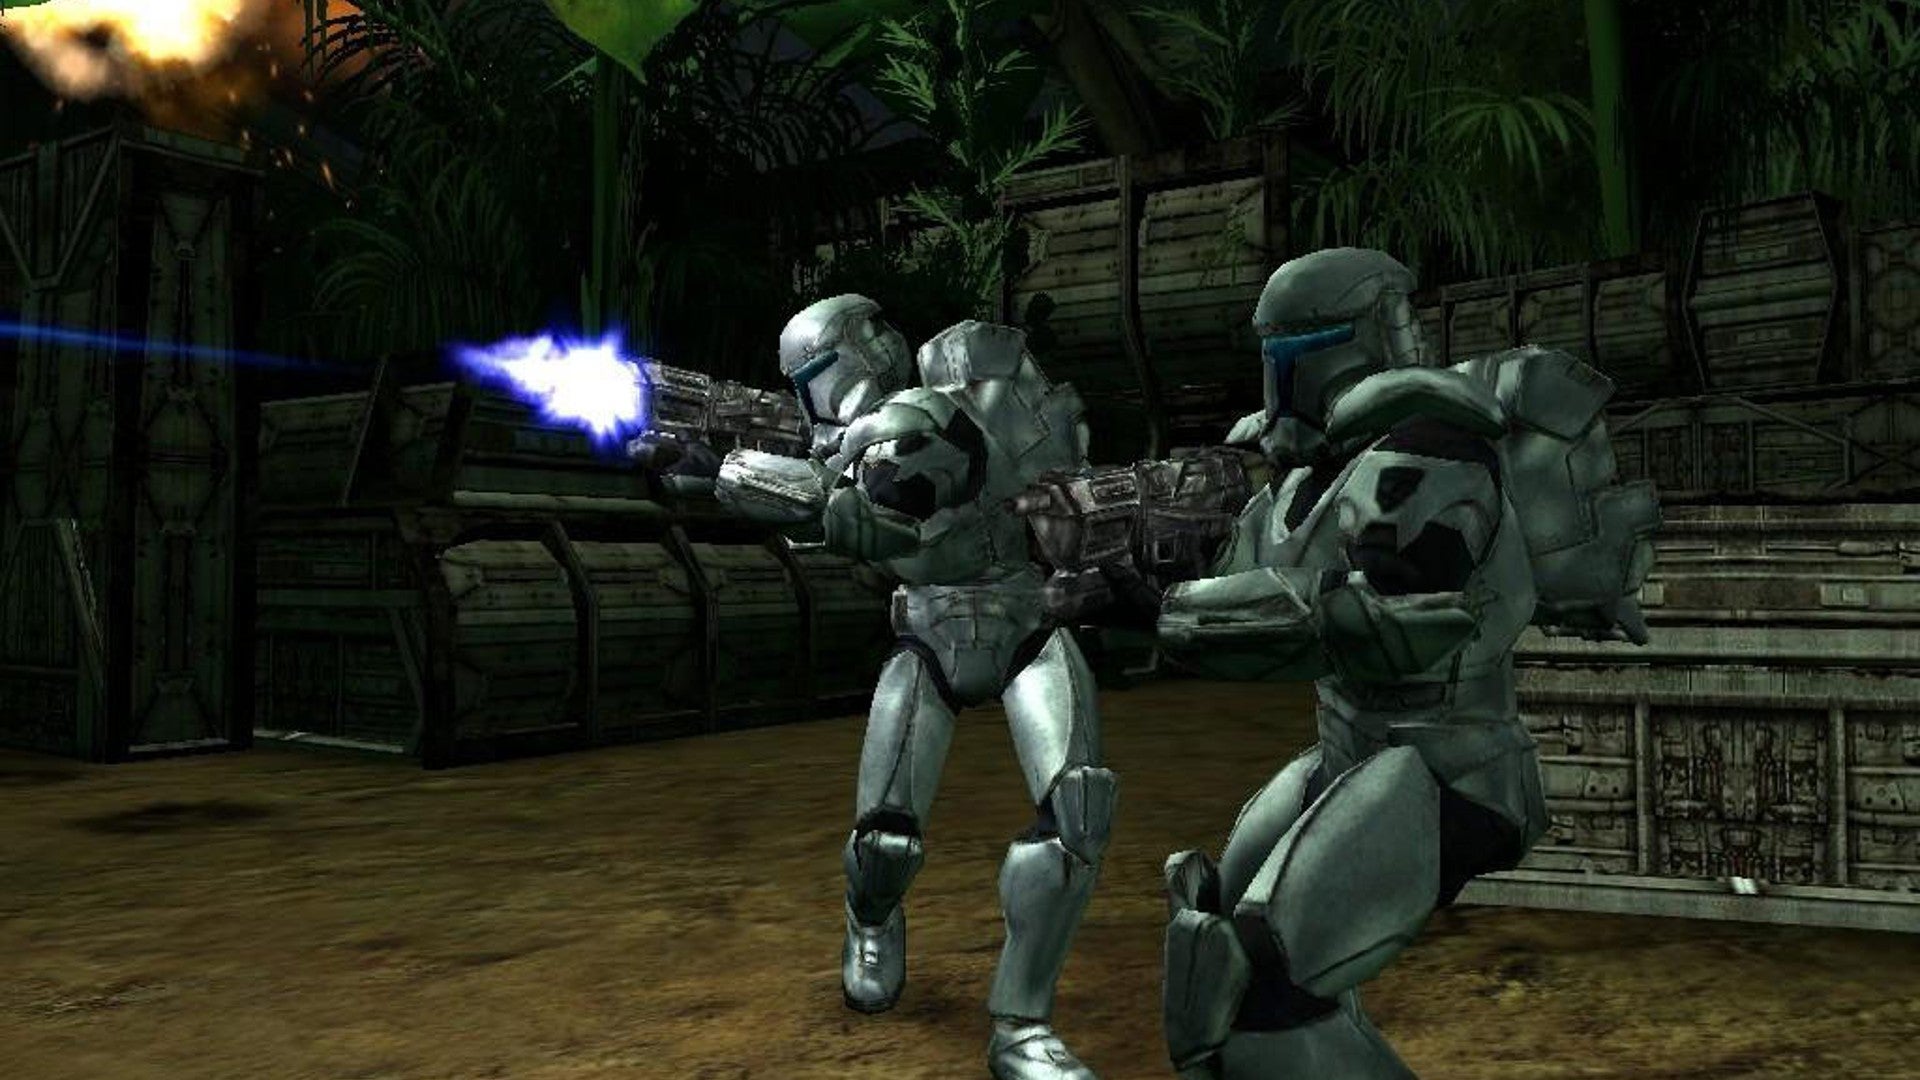 Star Wars Republic Commando image showing two commandos staring to the left as one fires their blaster. The background is a jungle compound.